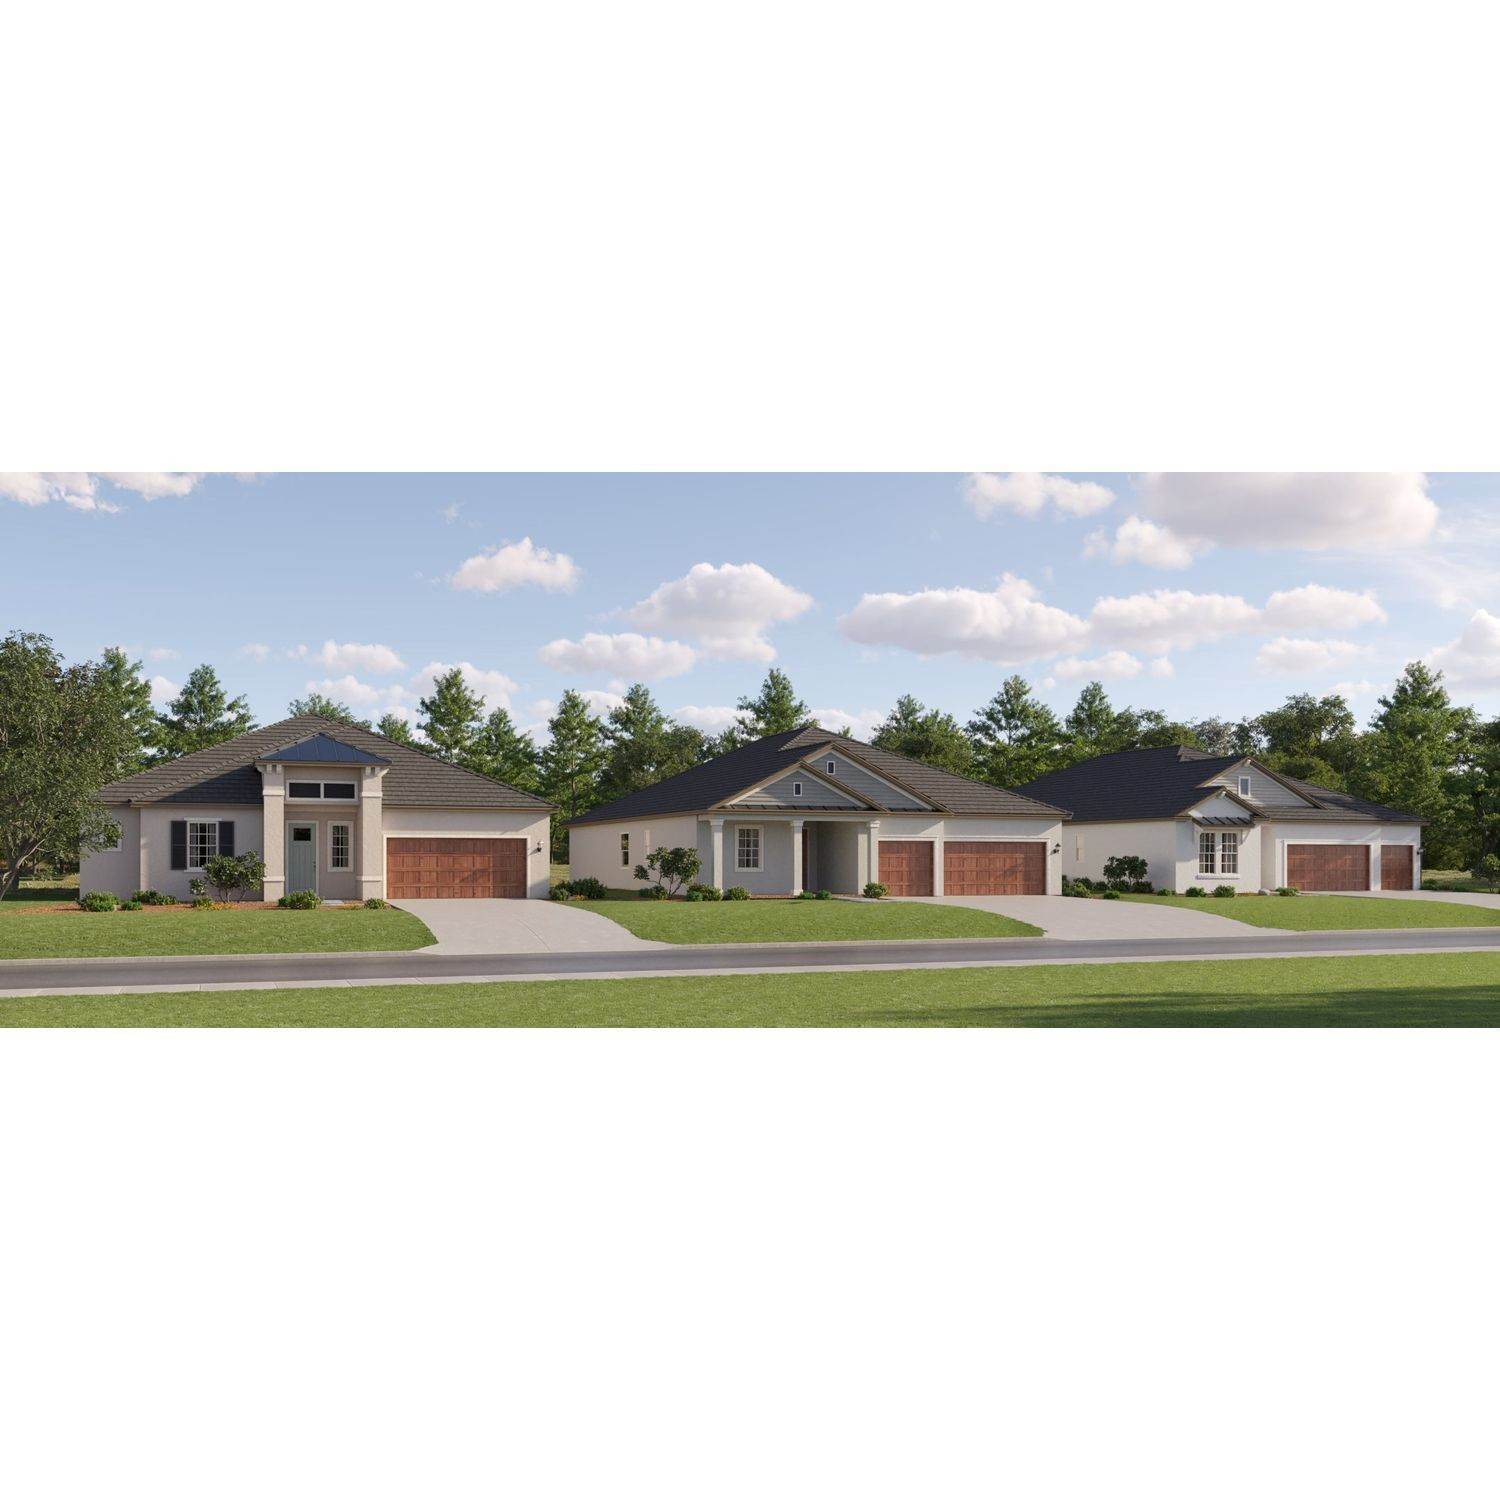 11. Angeline Active Adult - Active Adult Villas building at 11342 Flora Crew Ct, Land O' Lakes, FL 34638